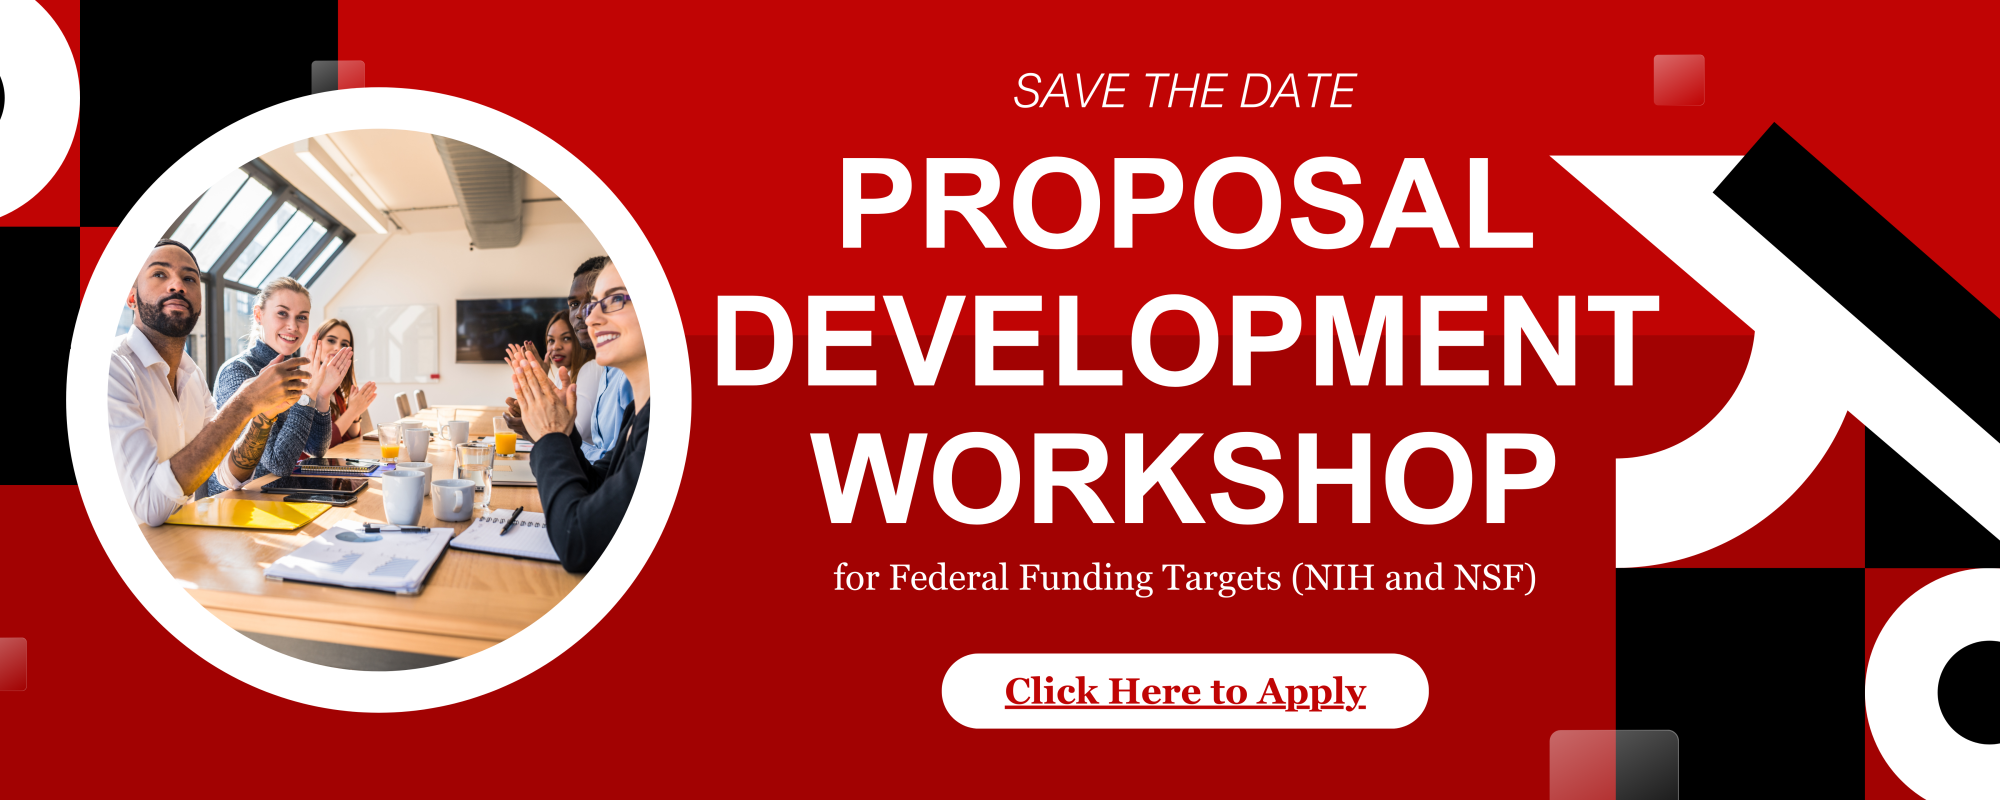 Save the date - Proposal Development Workshop for Federal Funding Targets